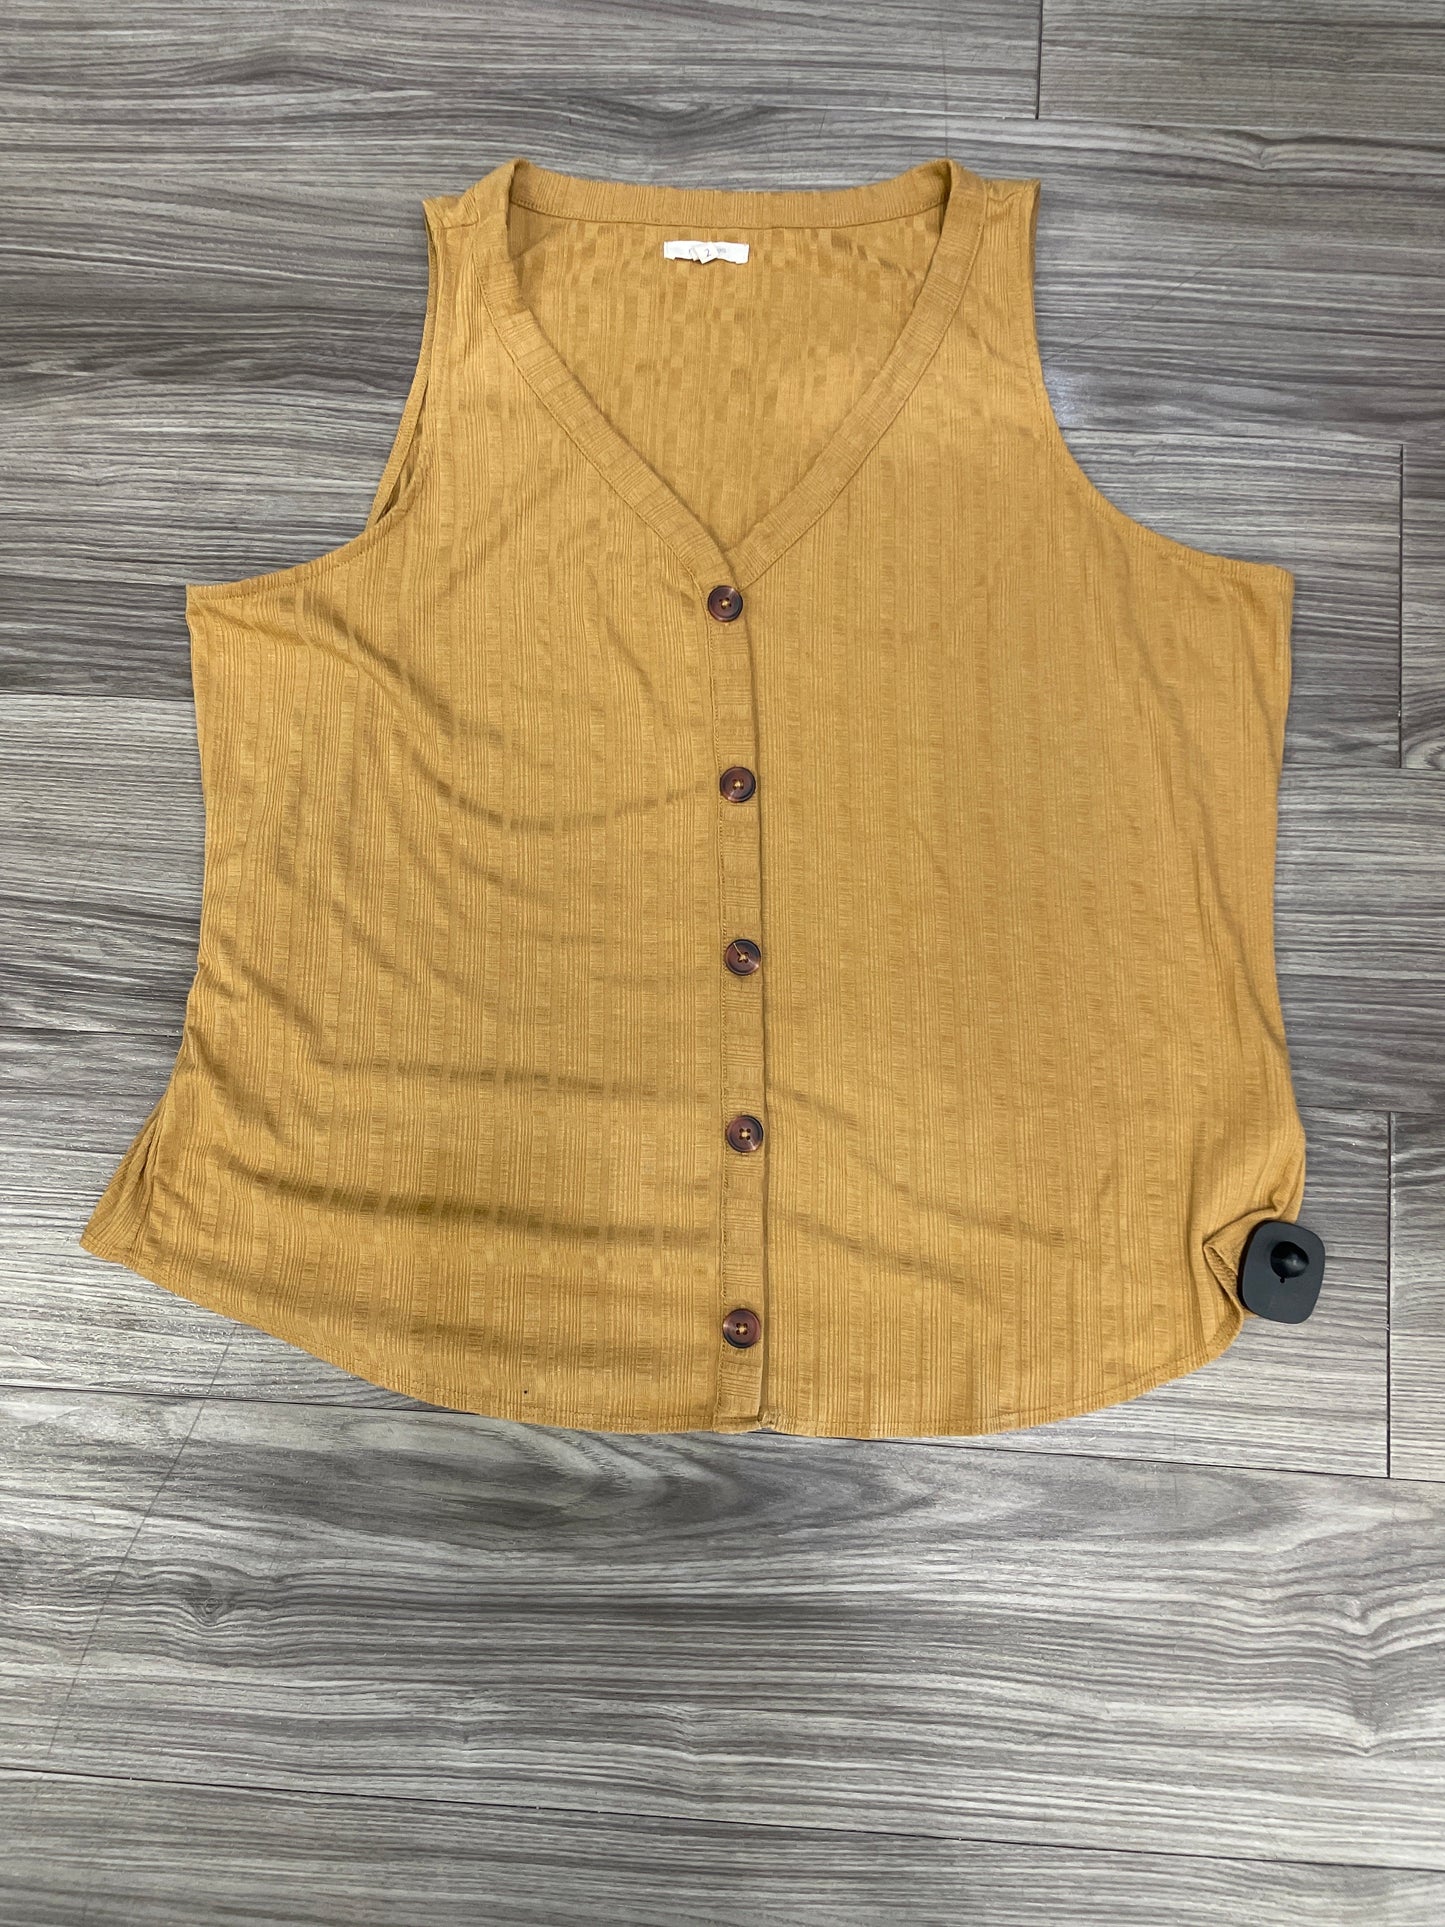 Yellow Tank Top Maurices, Size 2x